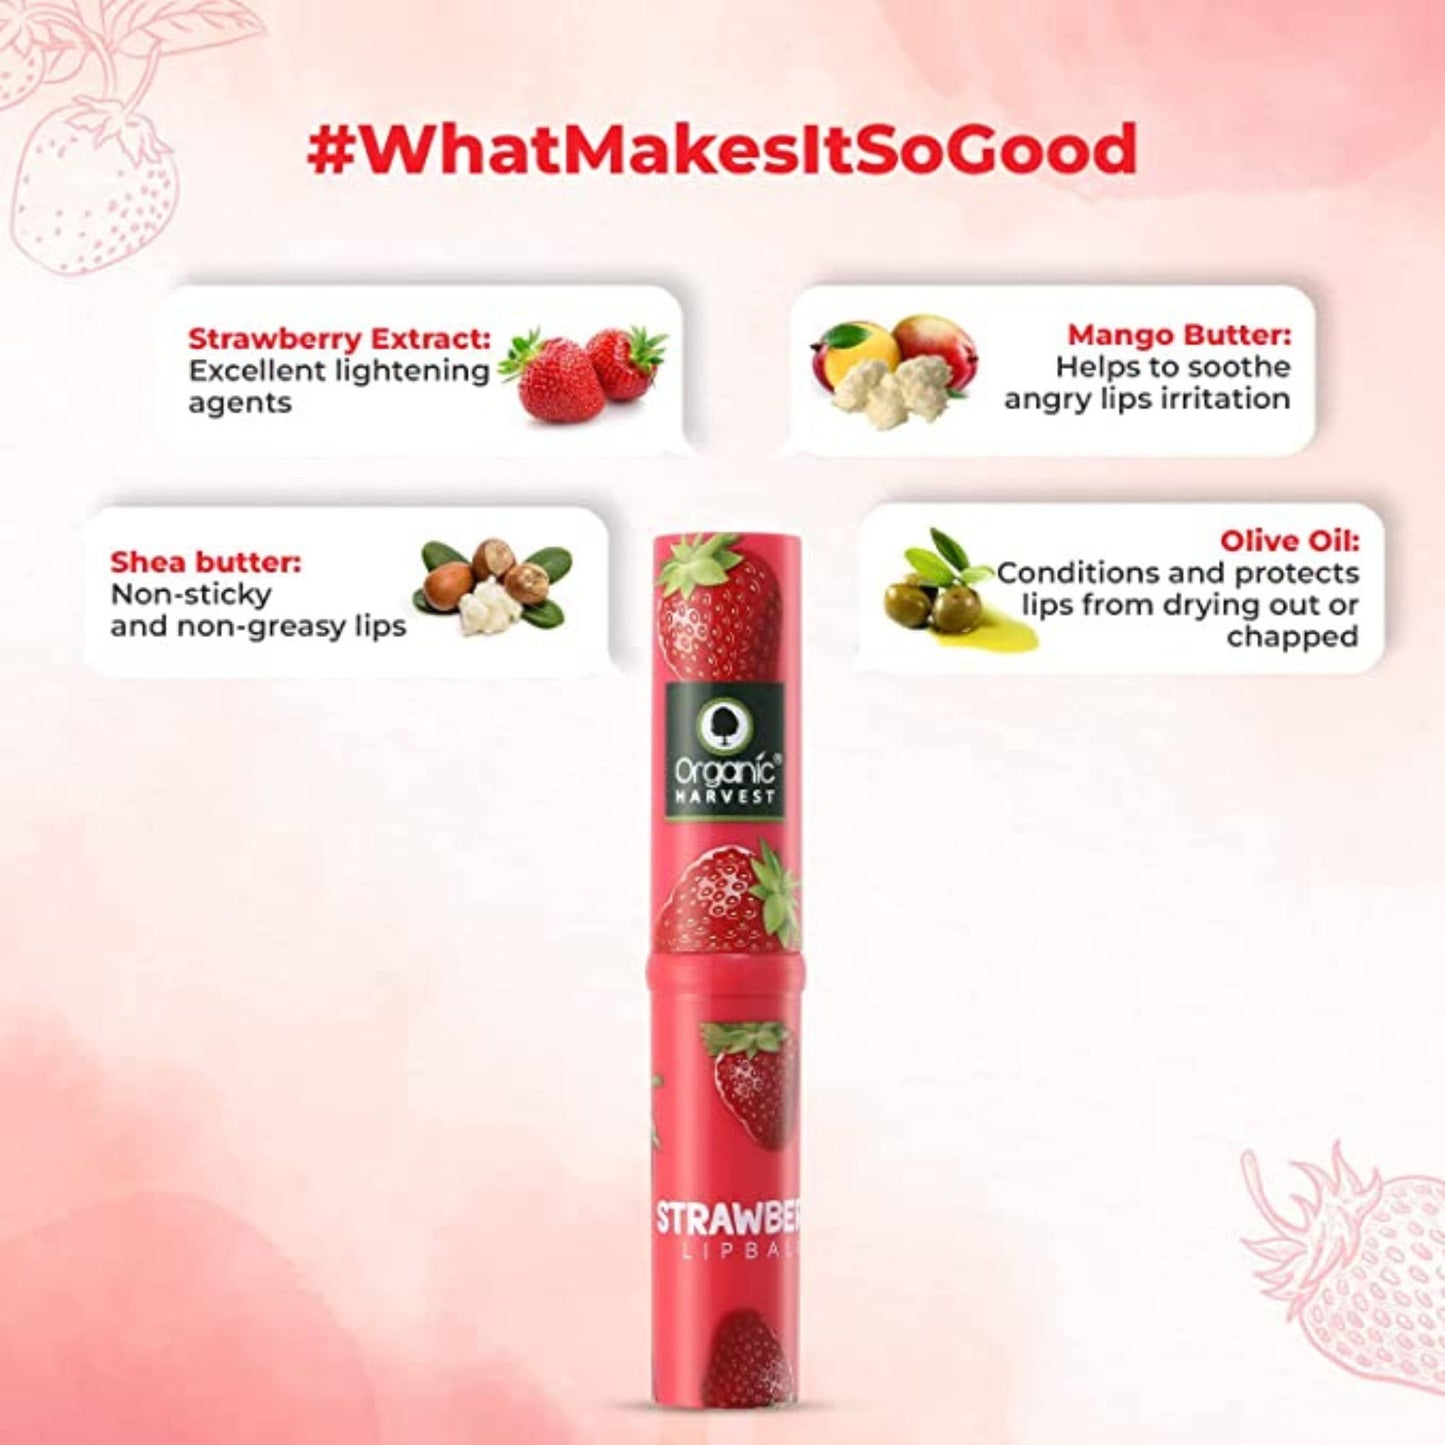 Organic Harvest Strawberry Flavour Lip Balm Enriched With Vitamin E & Benefits Of Mango Butter, For Dark Lips to Lighten, Lip Care for Dry & Chapped Lips, 100% Organic, Paraben & Sulphate Free - 3gm